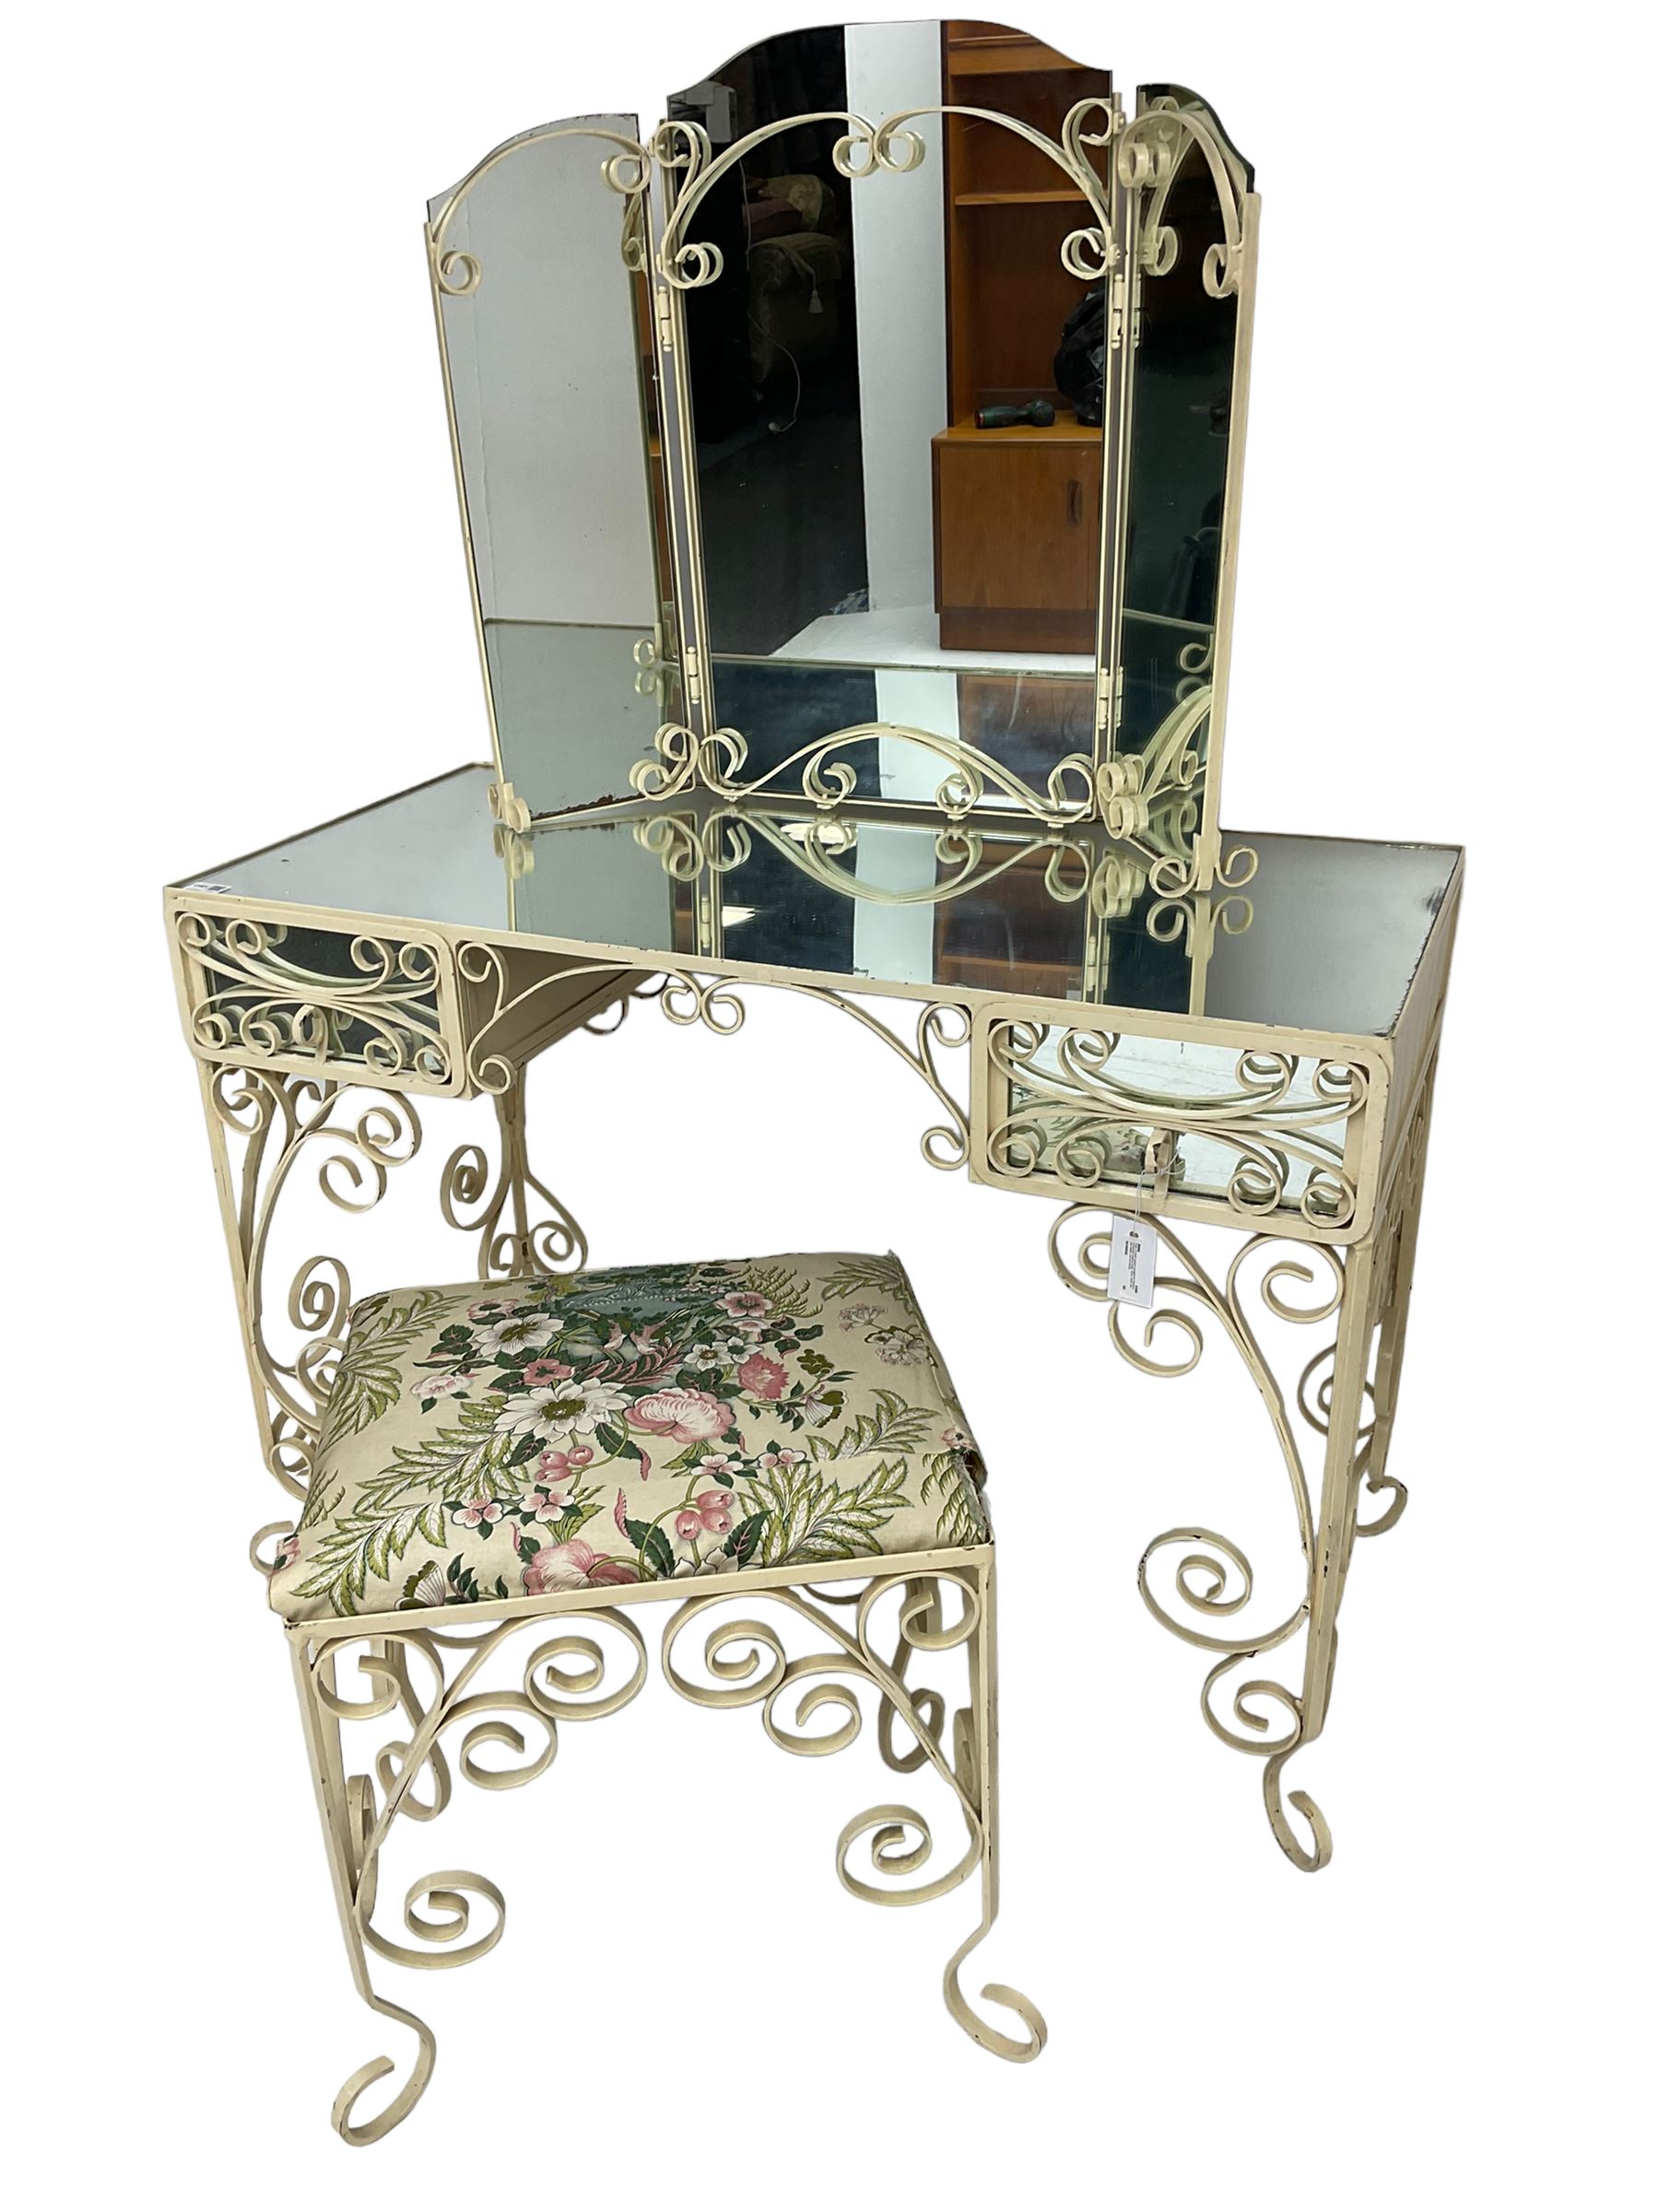 Cream painted scroll work wrought metal dressing table - Image 4 of 4